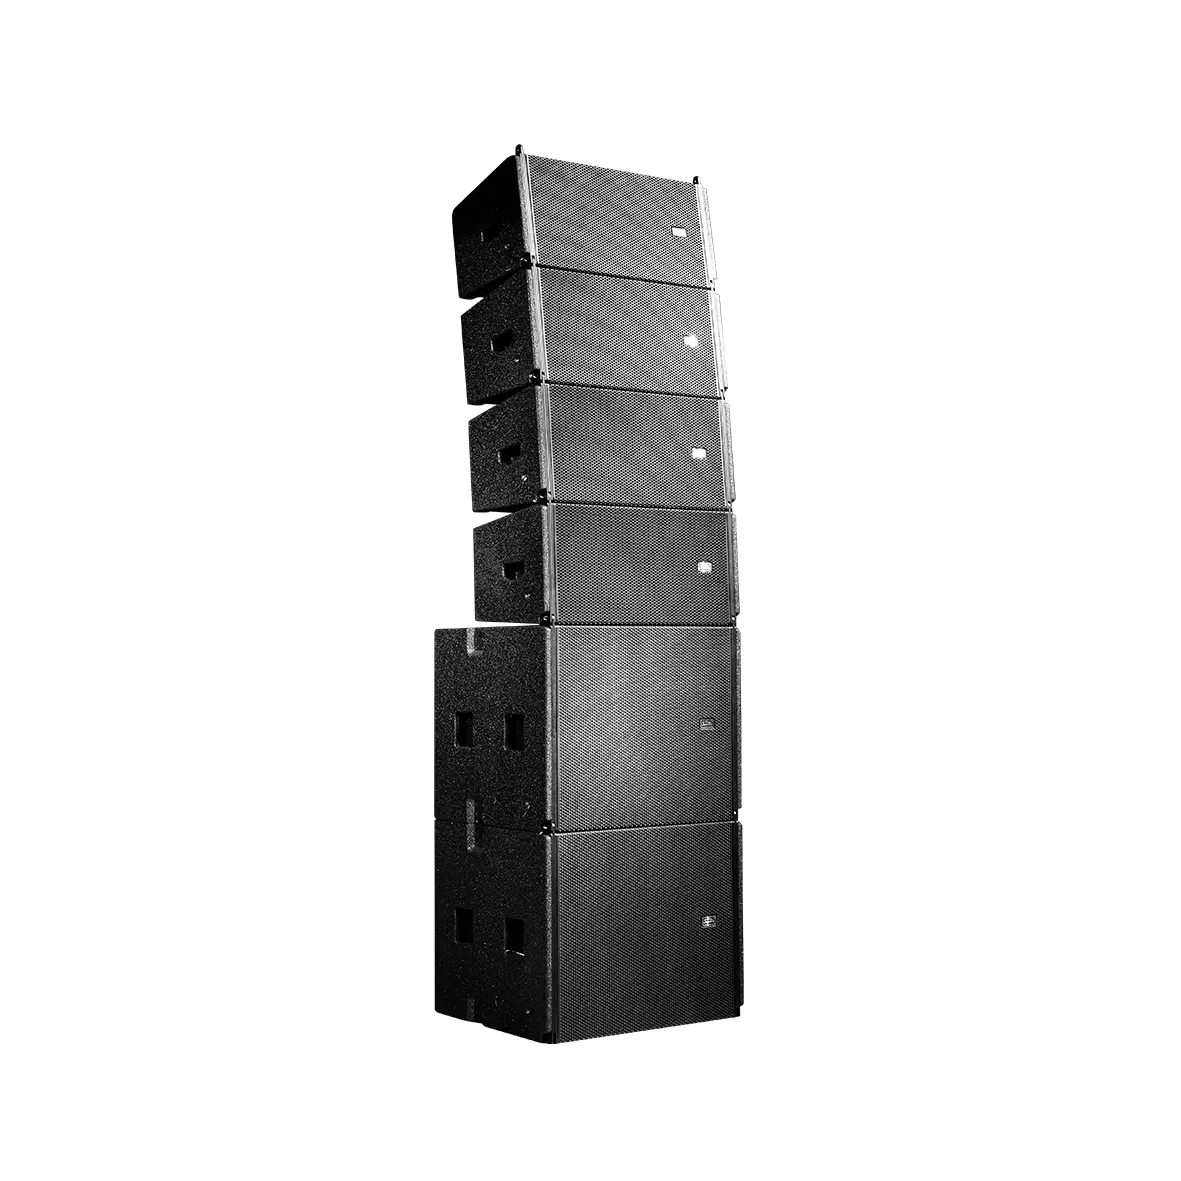 G312A 3-way active line array speaker (more powerful sound, smaller size)